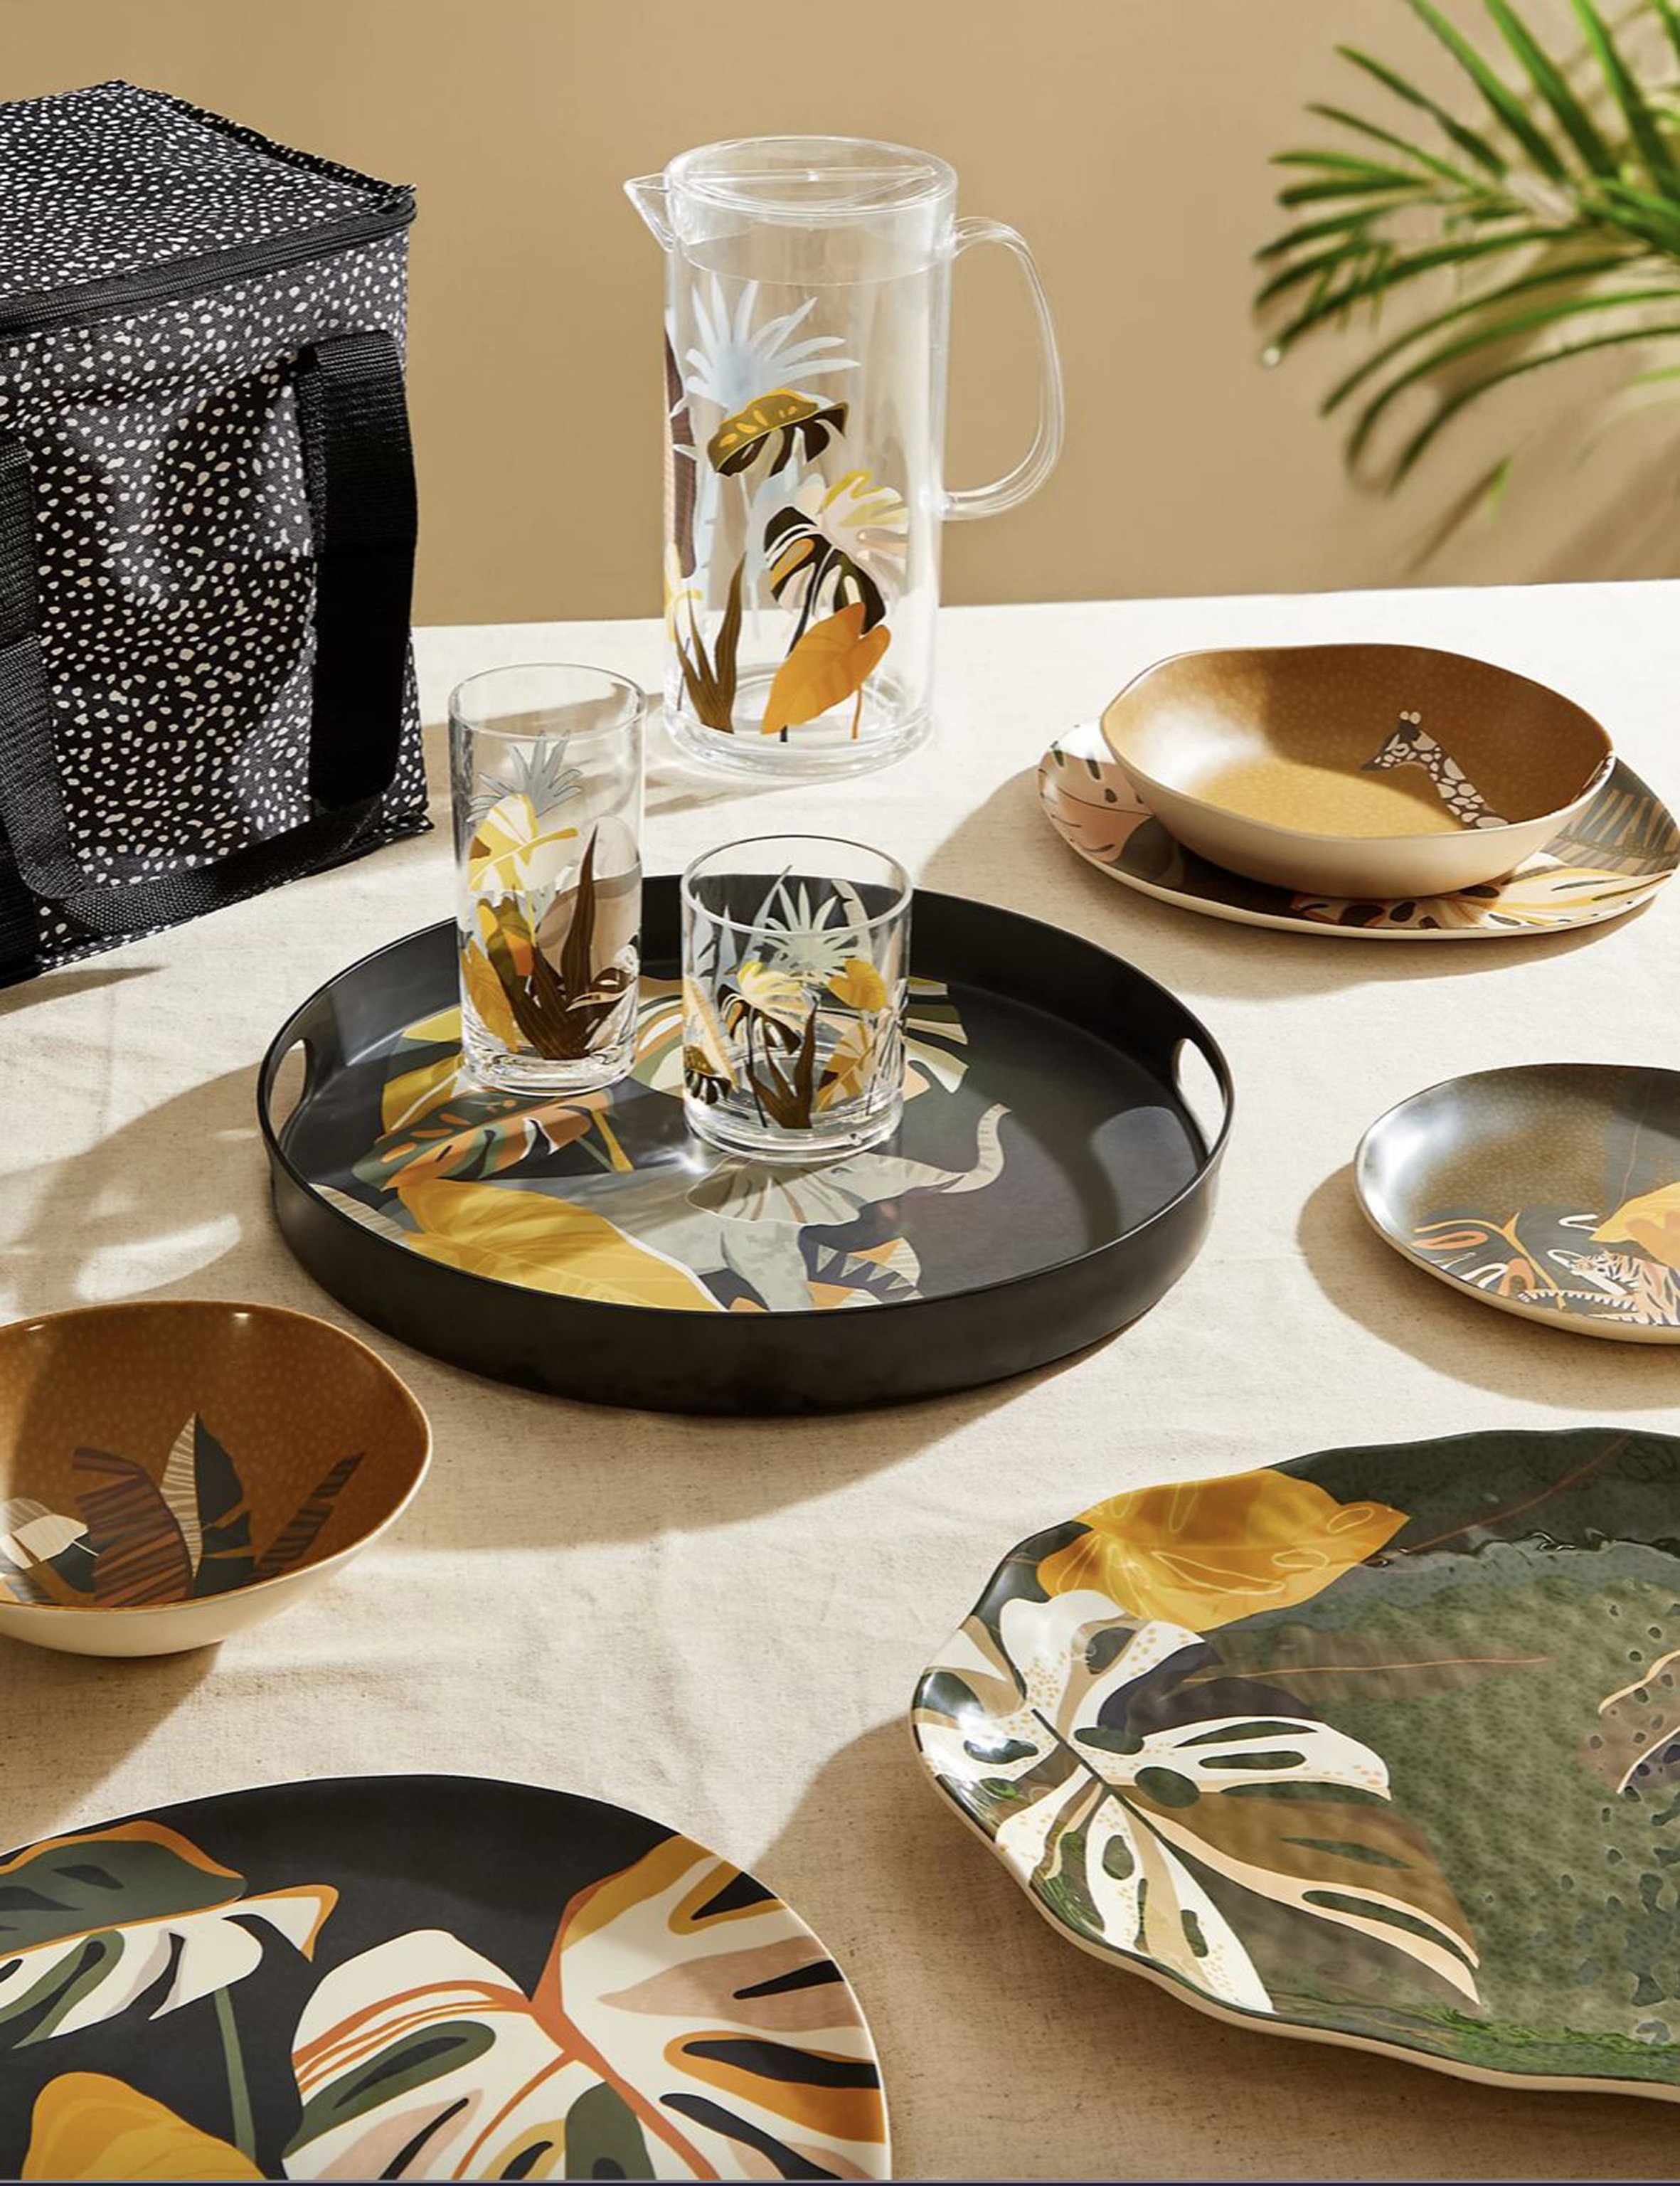 M&amp;S Collection Jungle Picnic Collection: Set of 4 Jungle Picnic Tumblers €14.09; Set of 4 Picnic Dinner Plates €17.61; Set of 4 Picnic Pasta Bowls €17.61 and Picnic Serving Platter €14.09